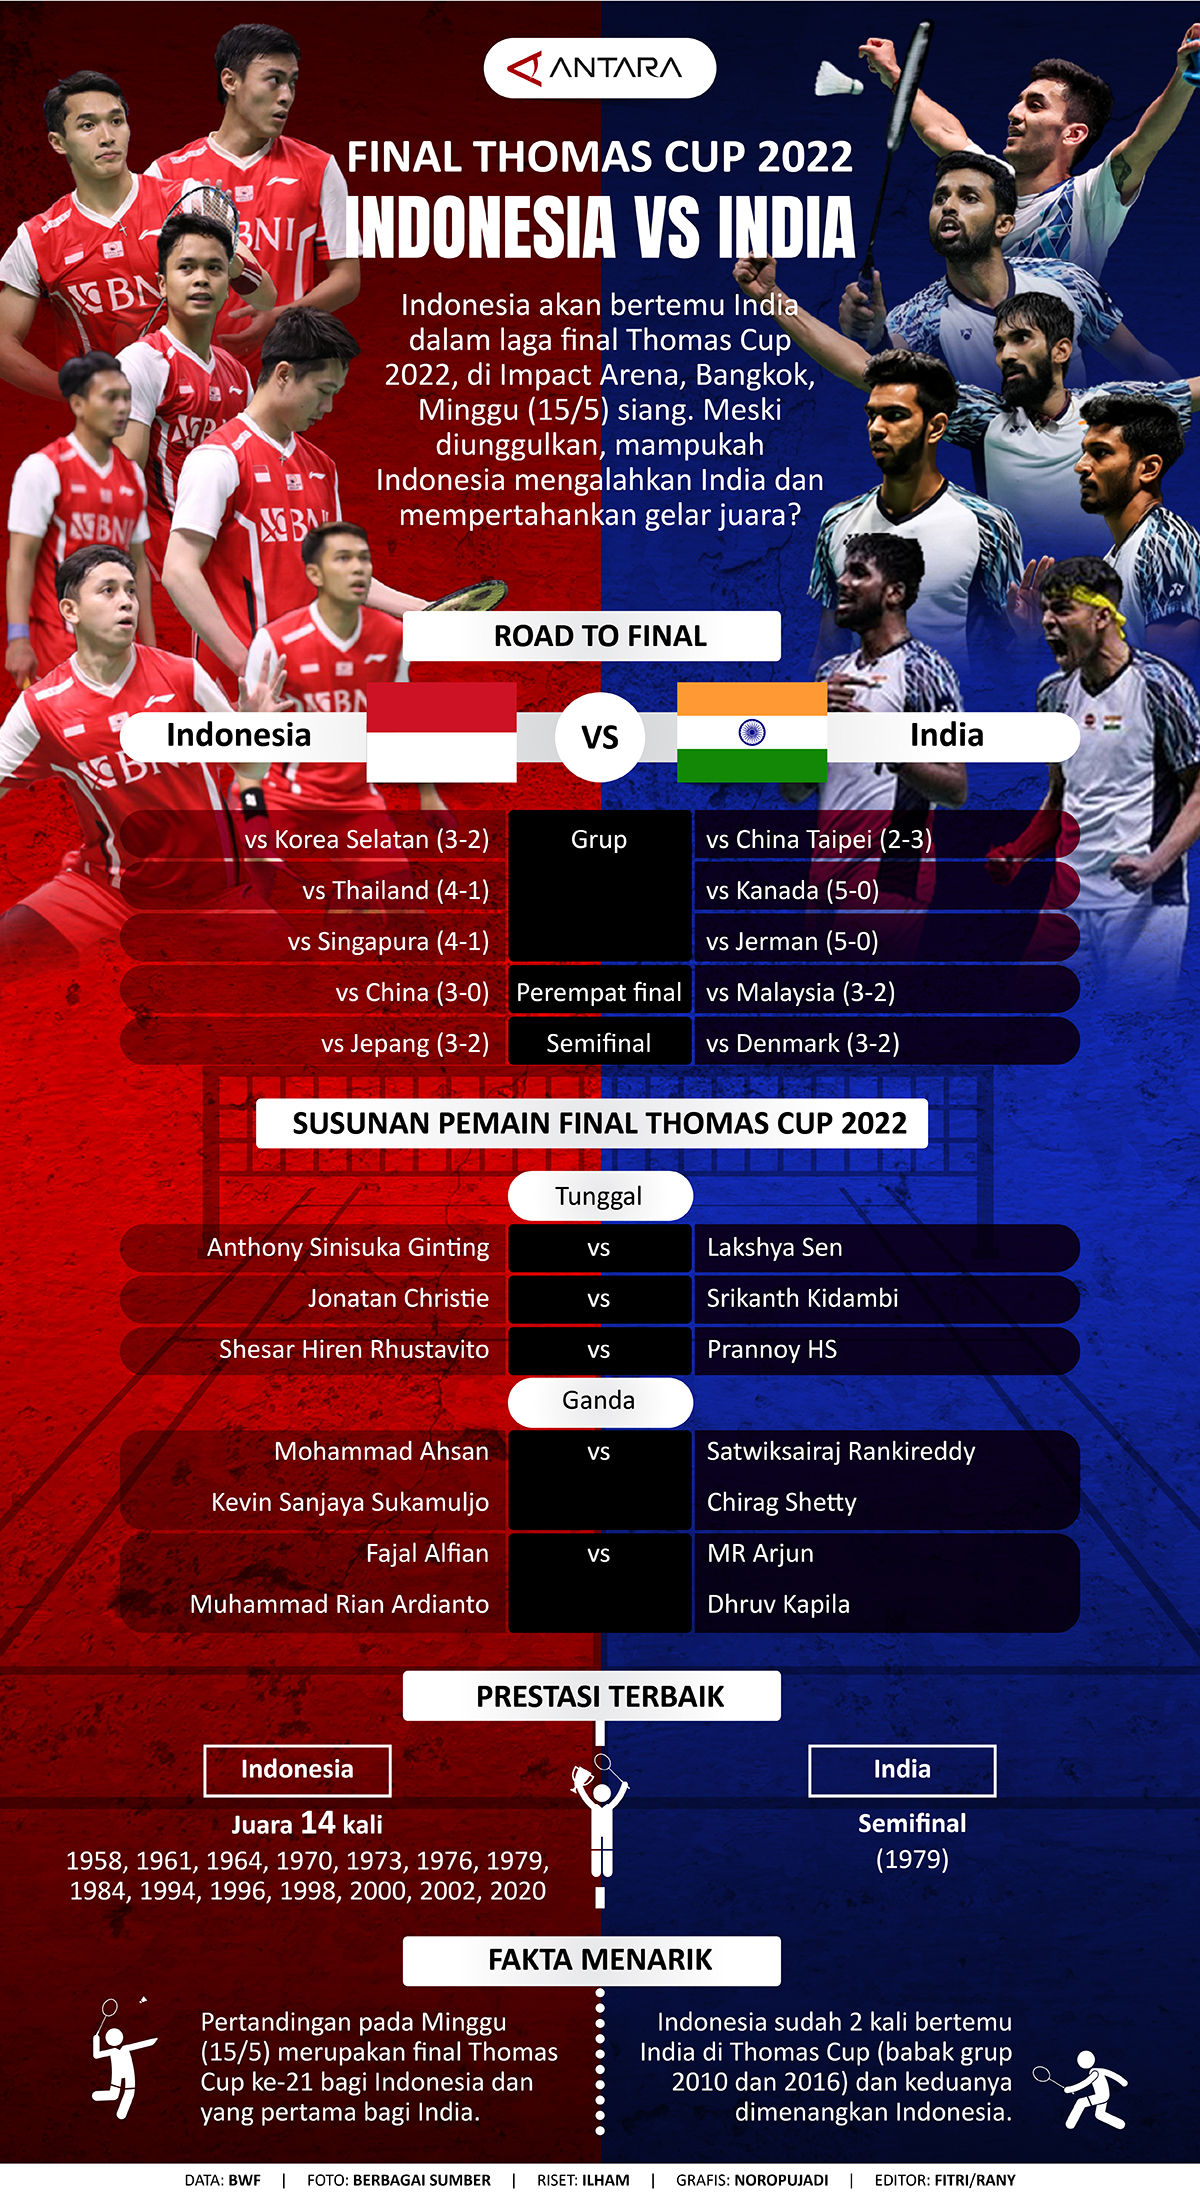 Final Thomas Cup 2022: Indonesia vs India